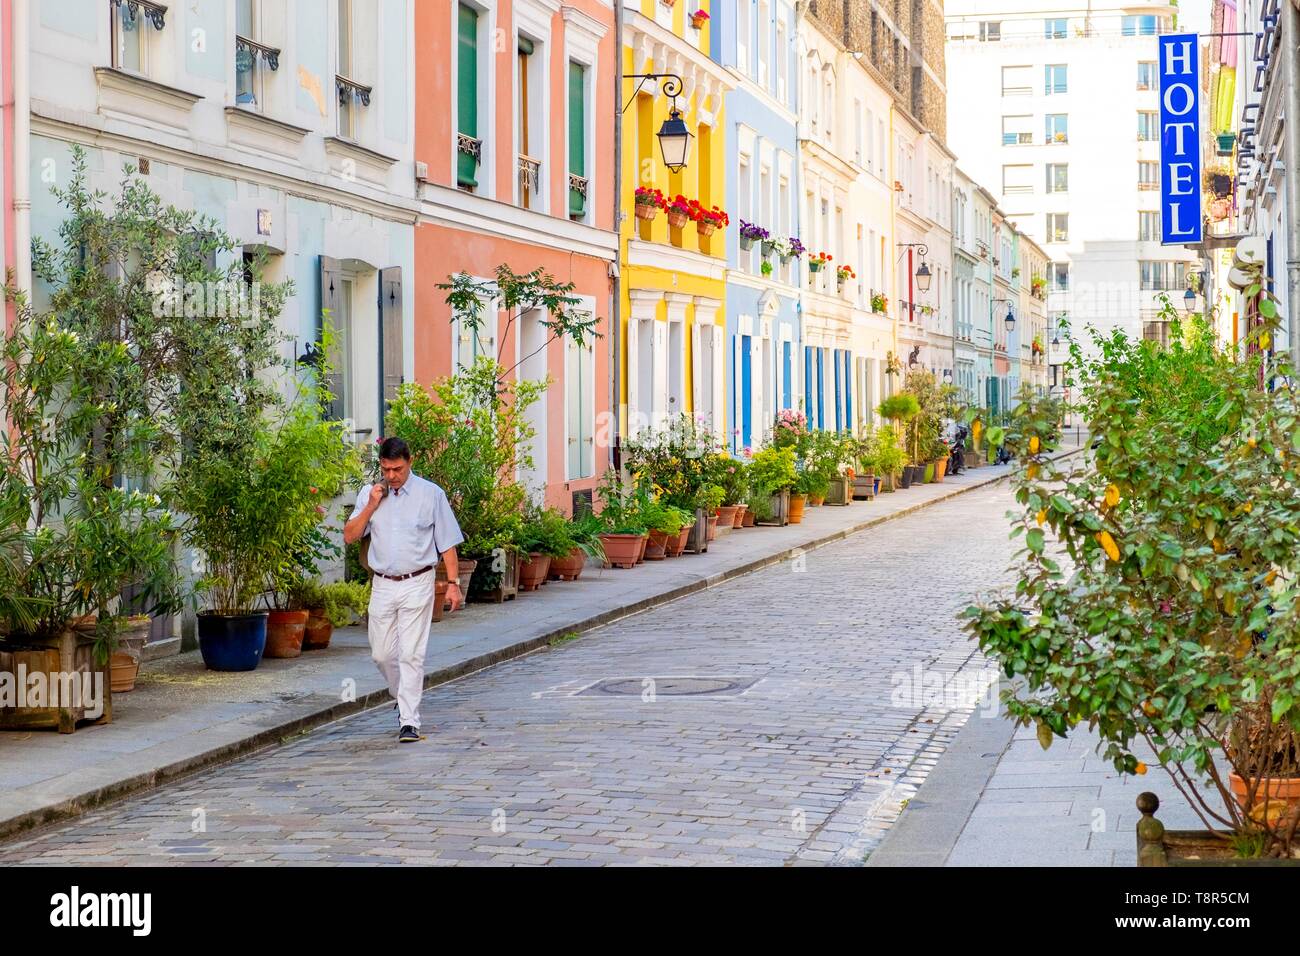 France, Paris, district of Quinze Vingts, rue Cremieux is a pedestrian and paved street, lined with small pavilions with colorful facades Stock Photo